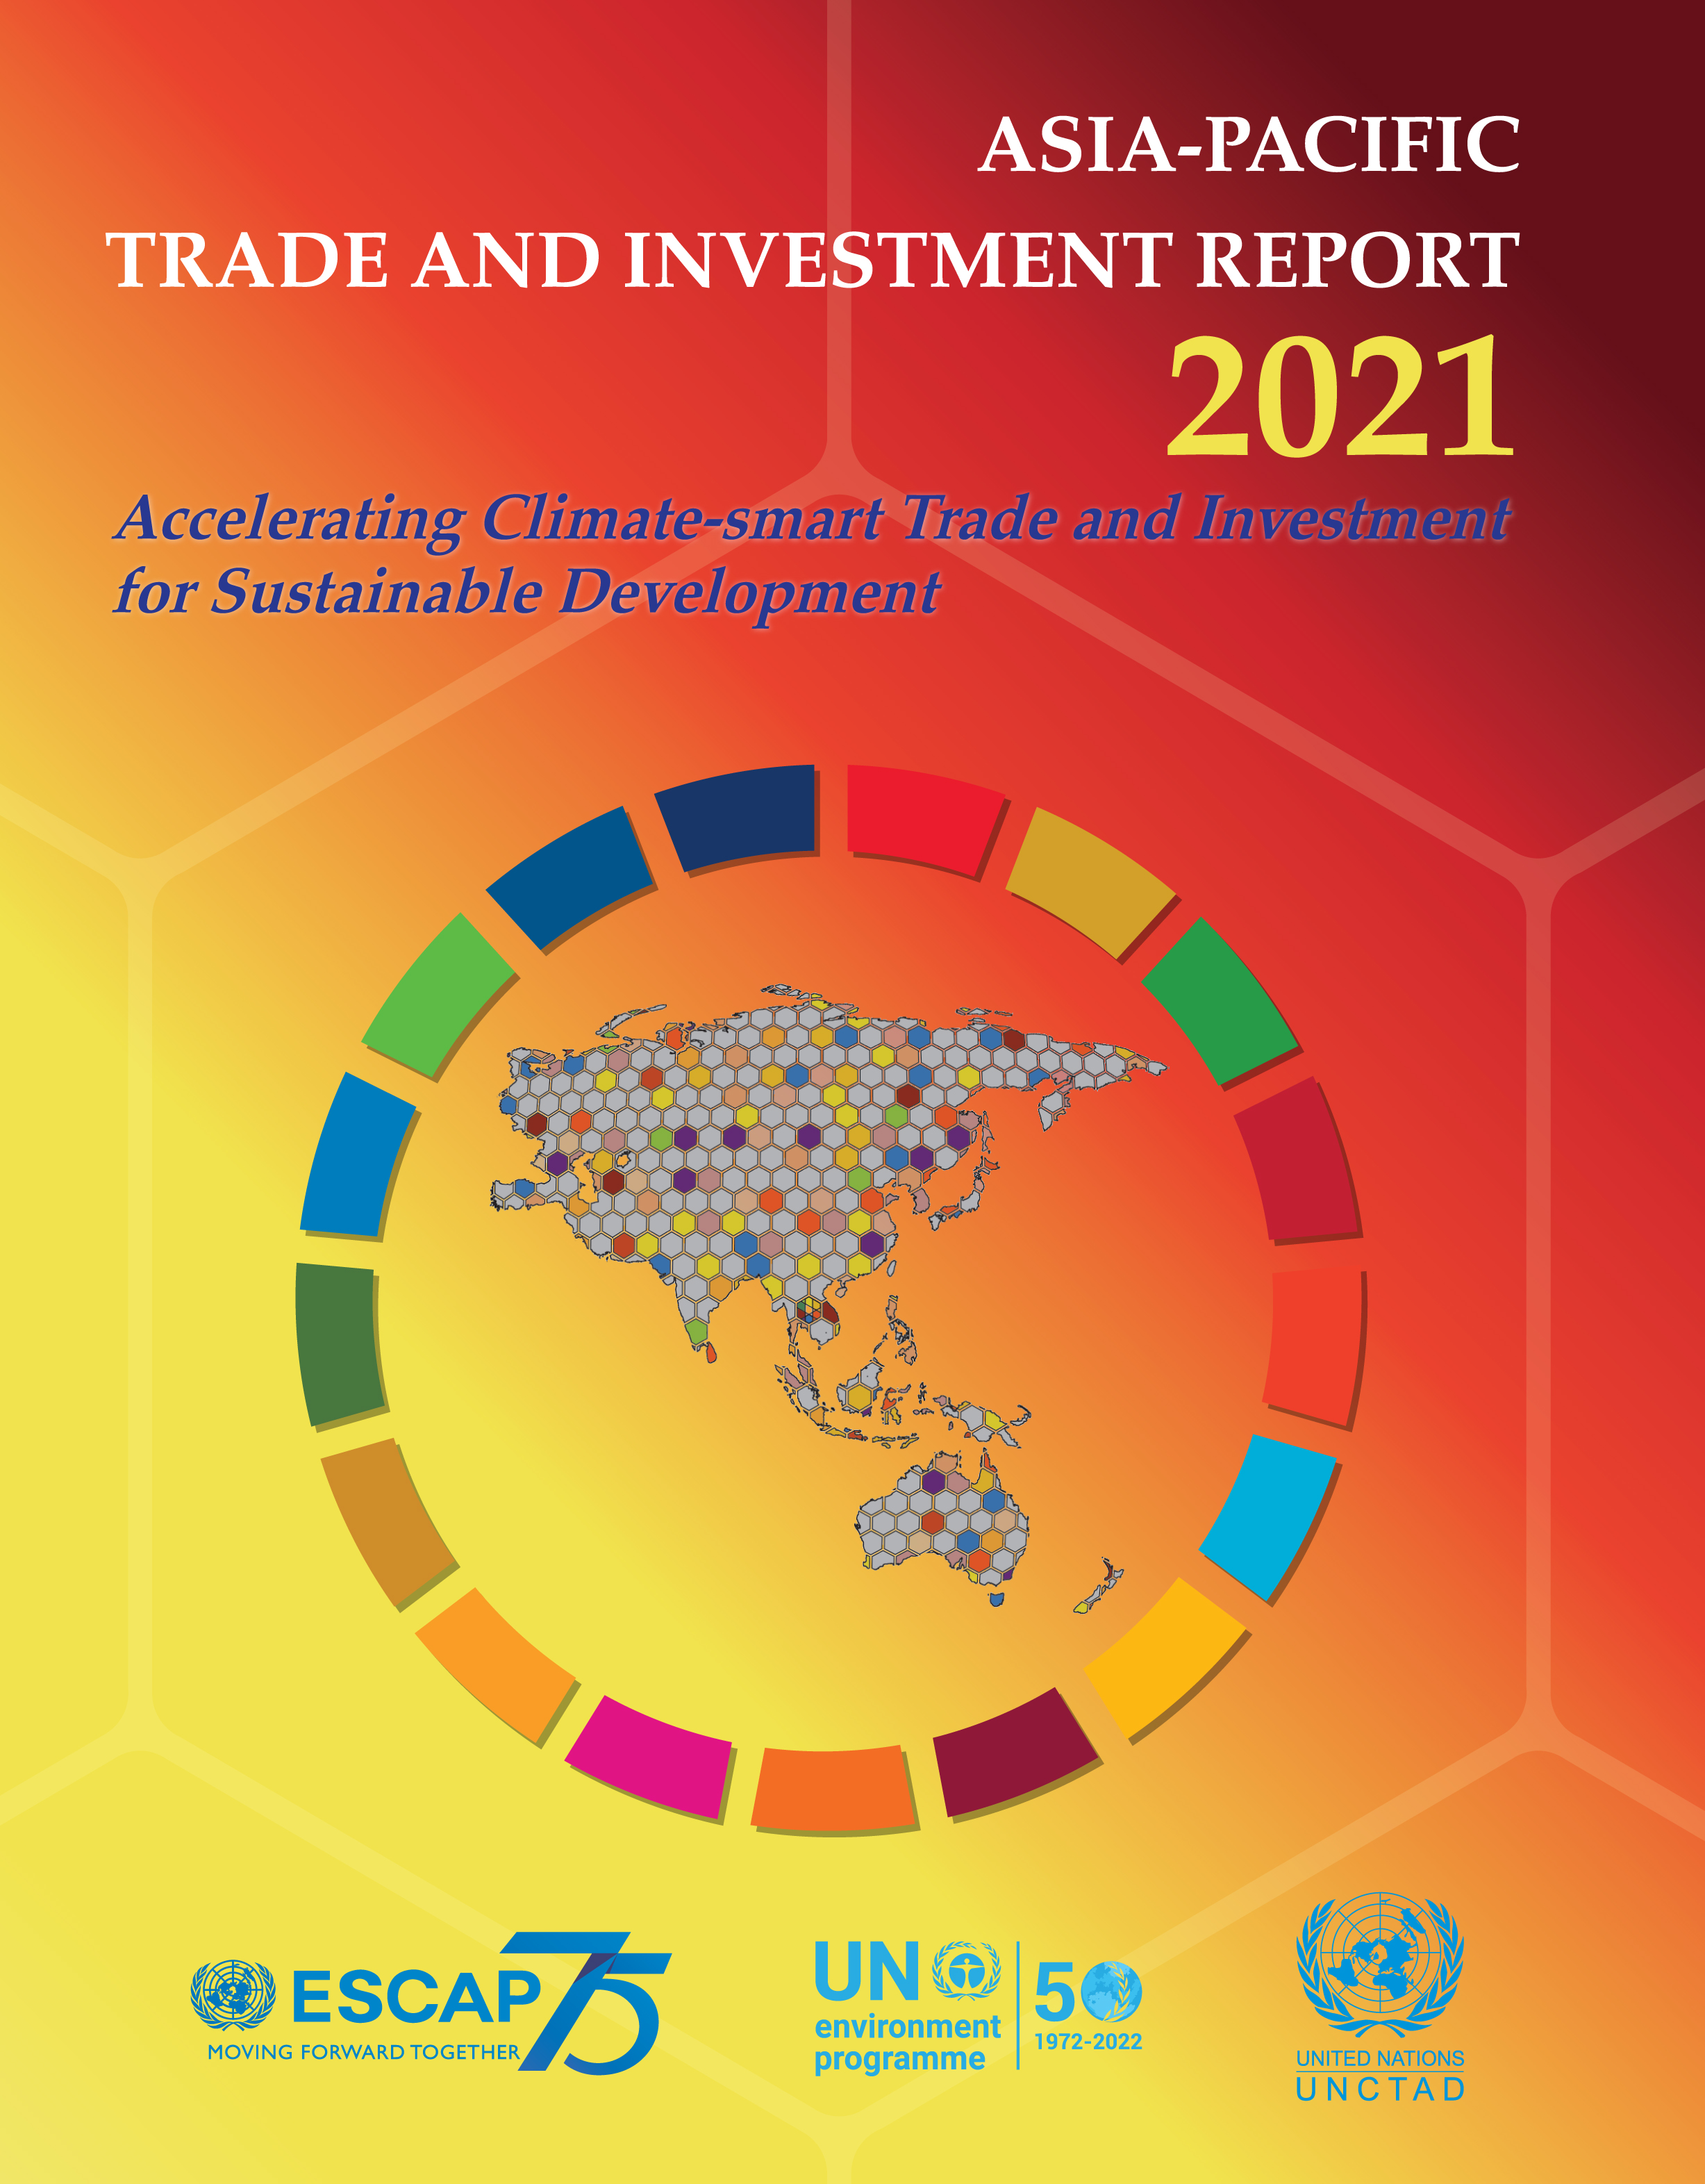 image of State of play: How climate smart is trade and investment in Asia and the Pacific?